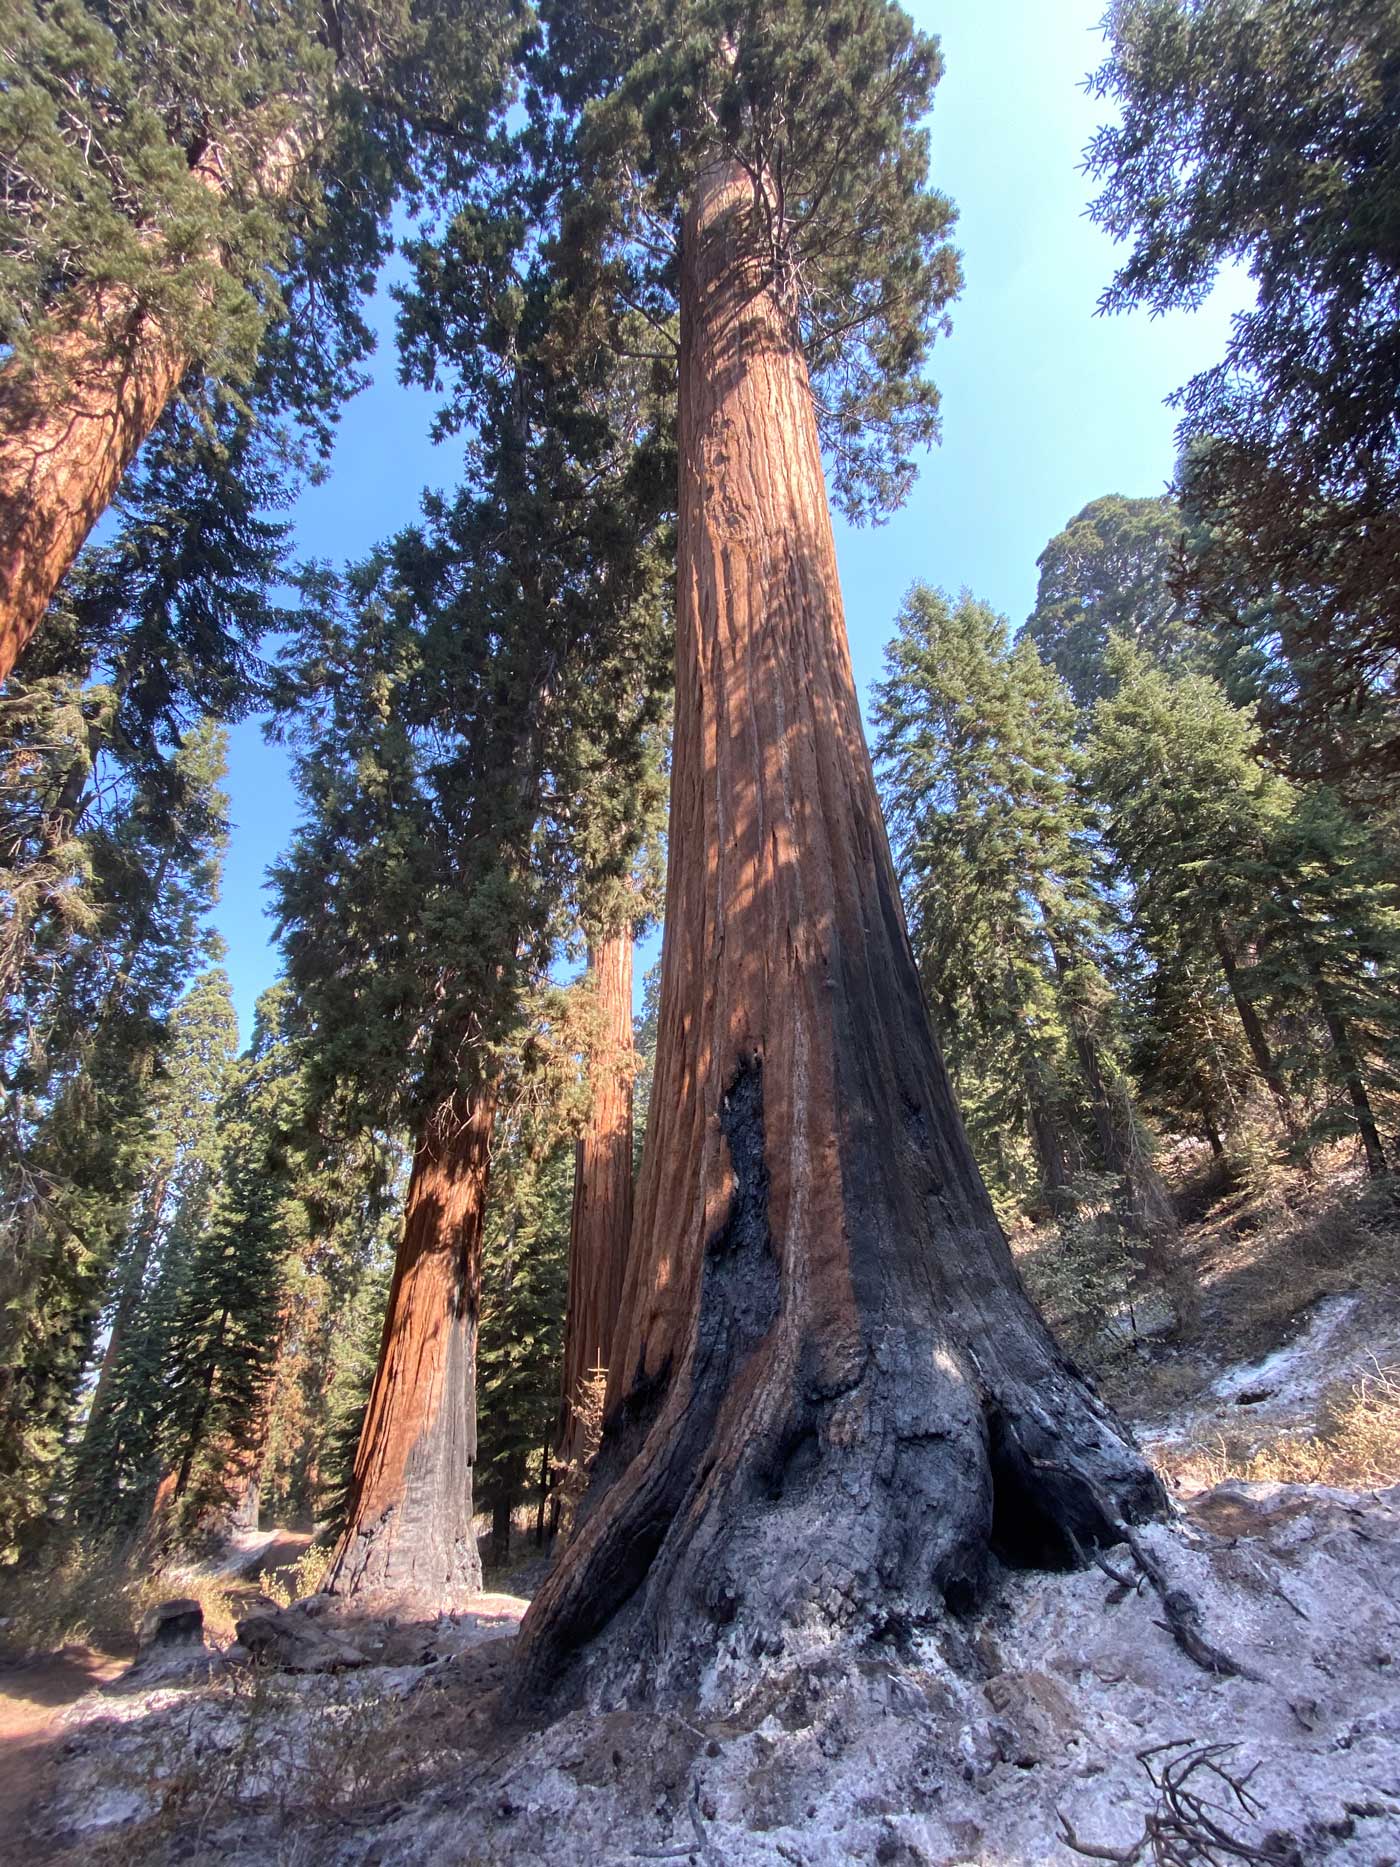 A burn scar running up the side of a still-living giant sequoia.